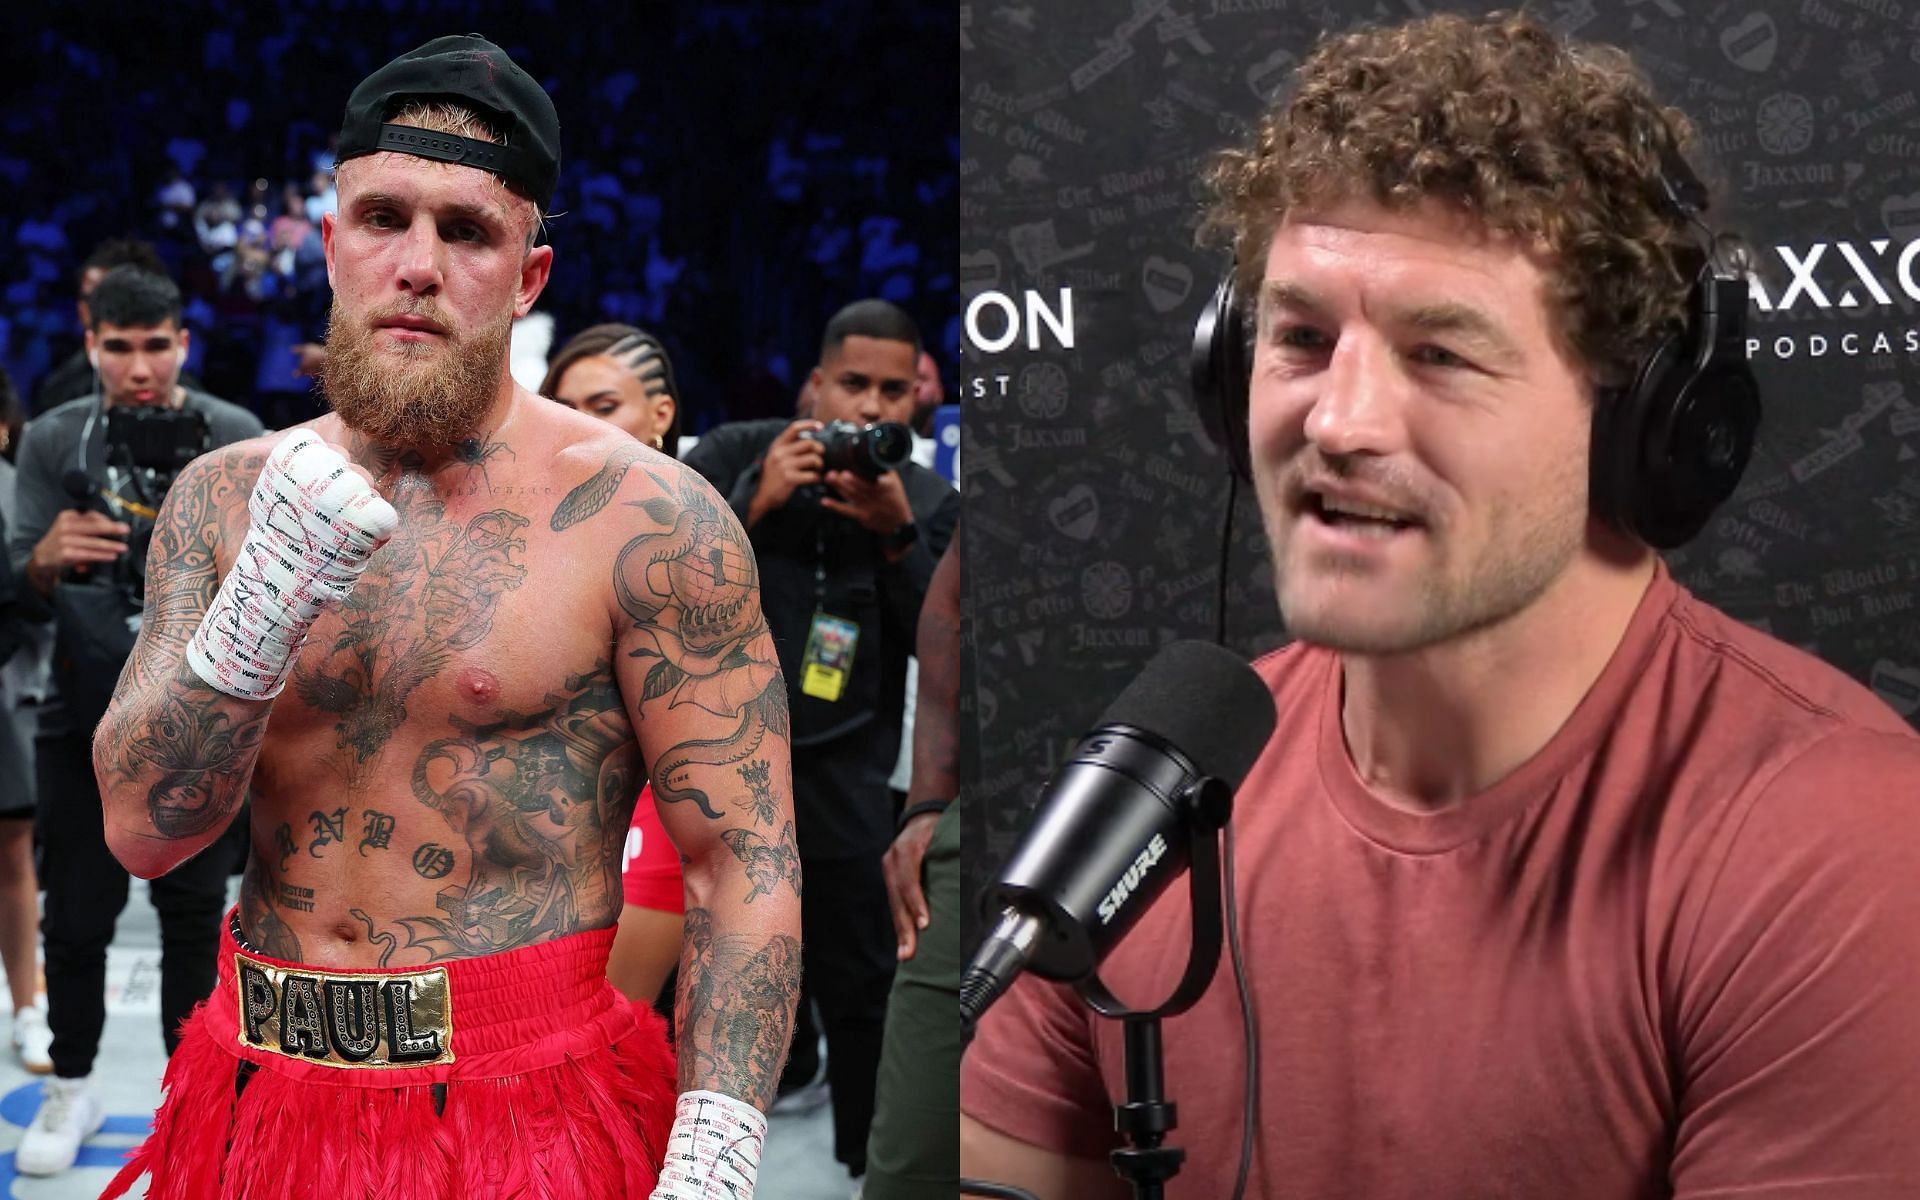 Ben Askren describes relationship with Jake Paul following their boxing bout [Image courtesy: Getty Images, and JAXXON PODCAST - YouTube]